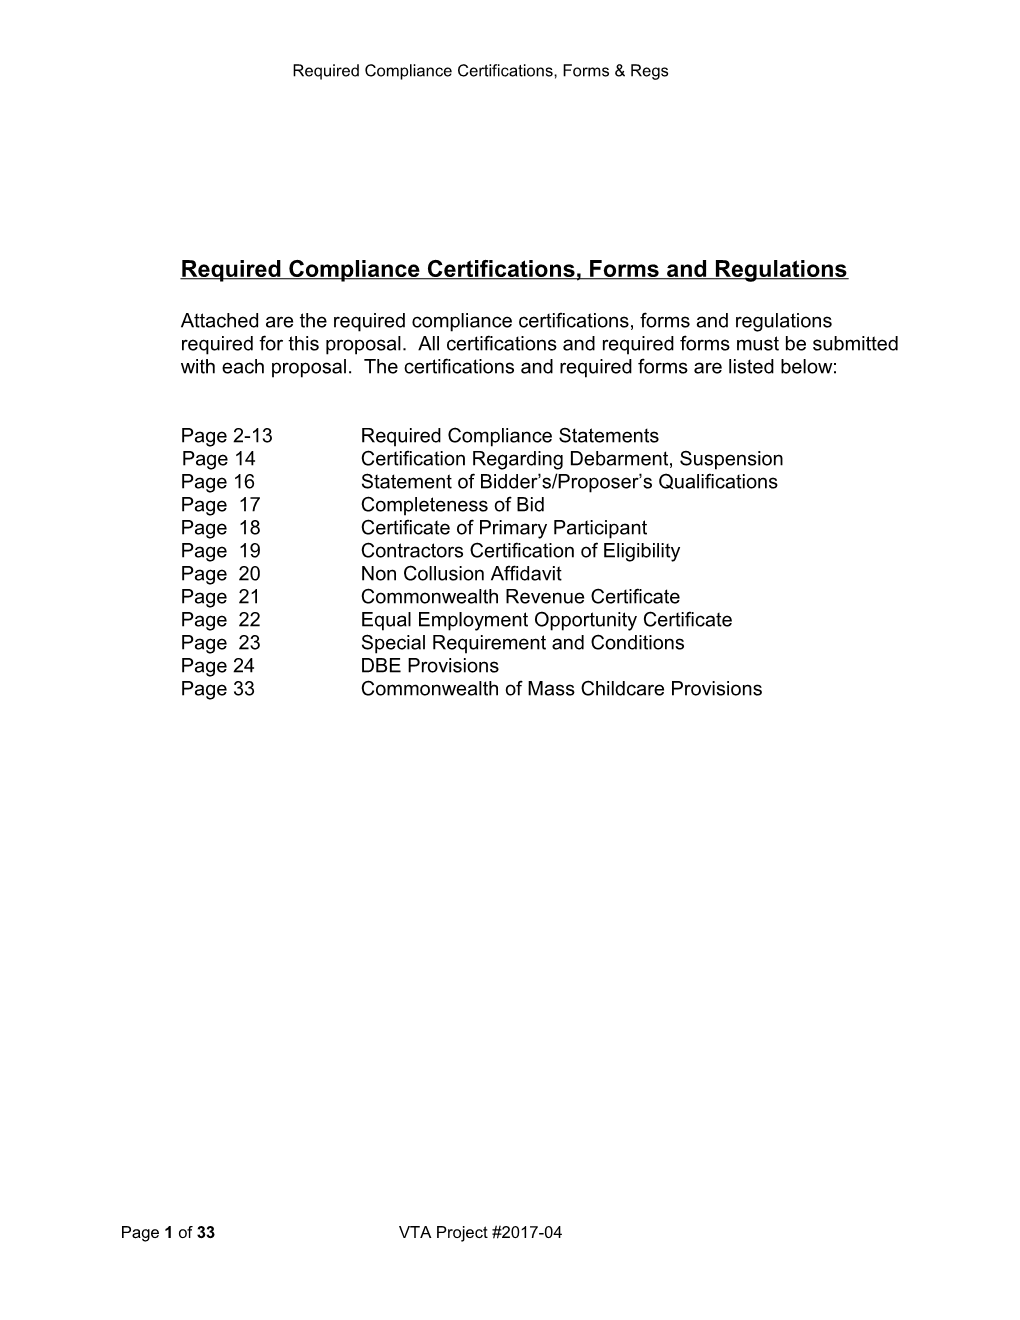 Required Compliance Certifications, Forms and Regulations